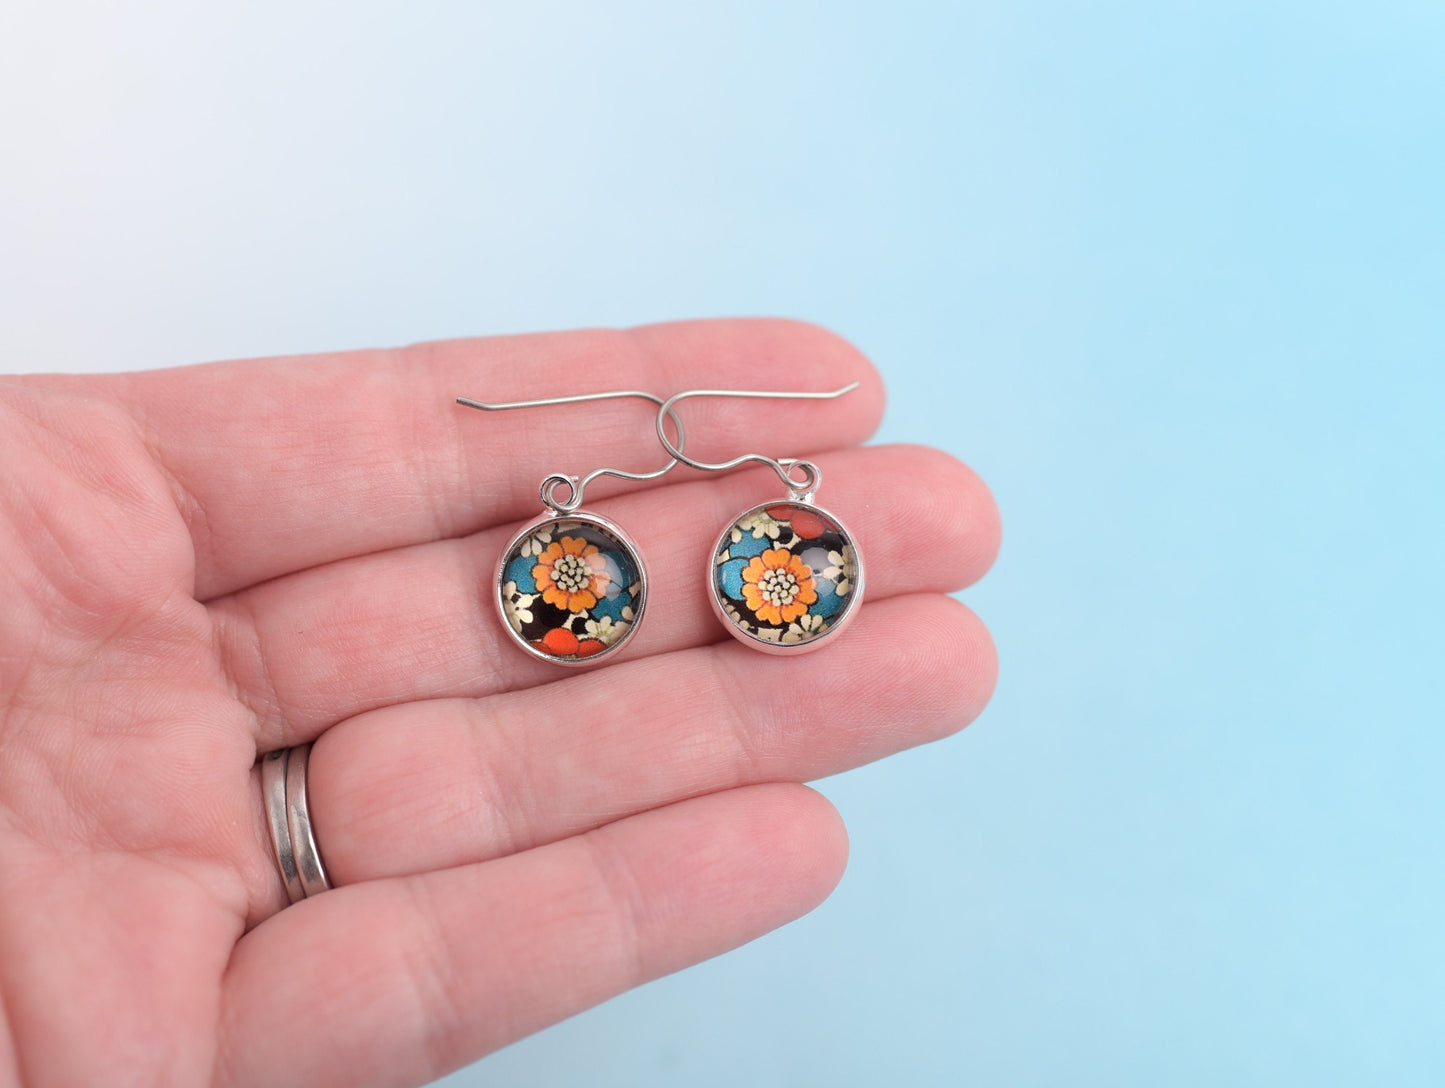 Retro Floral Dangle Earrings with Titanium Ear Wires